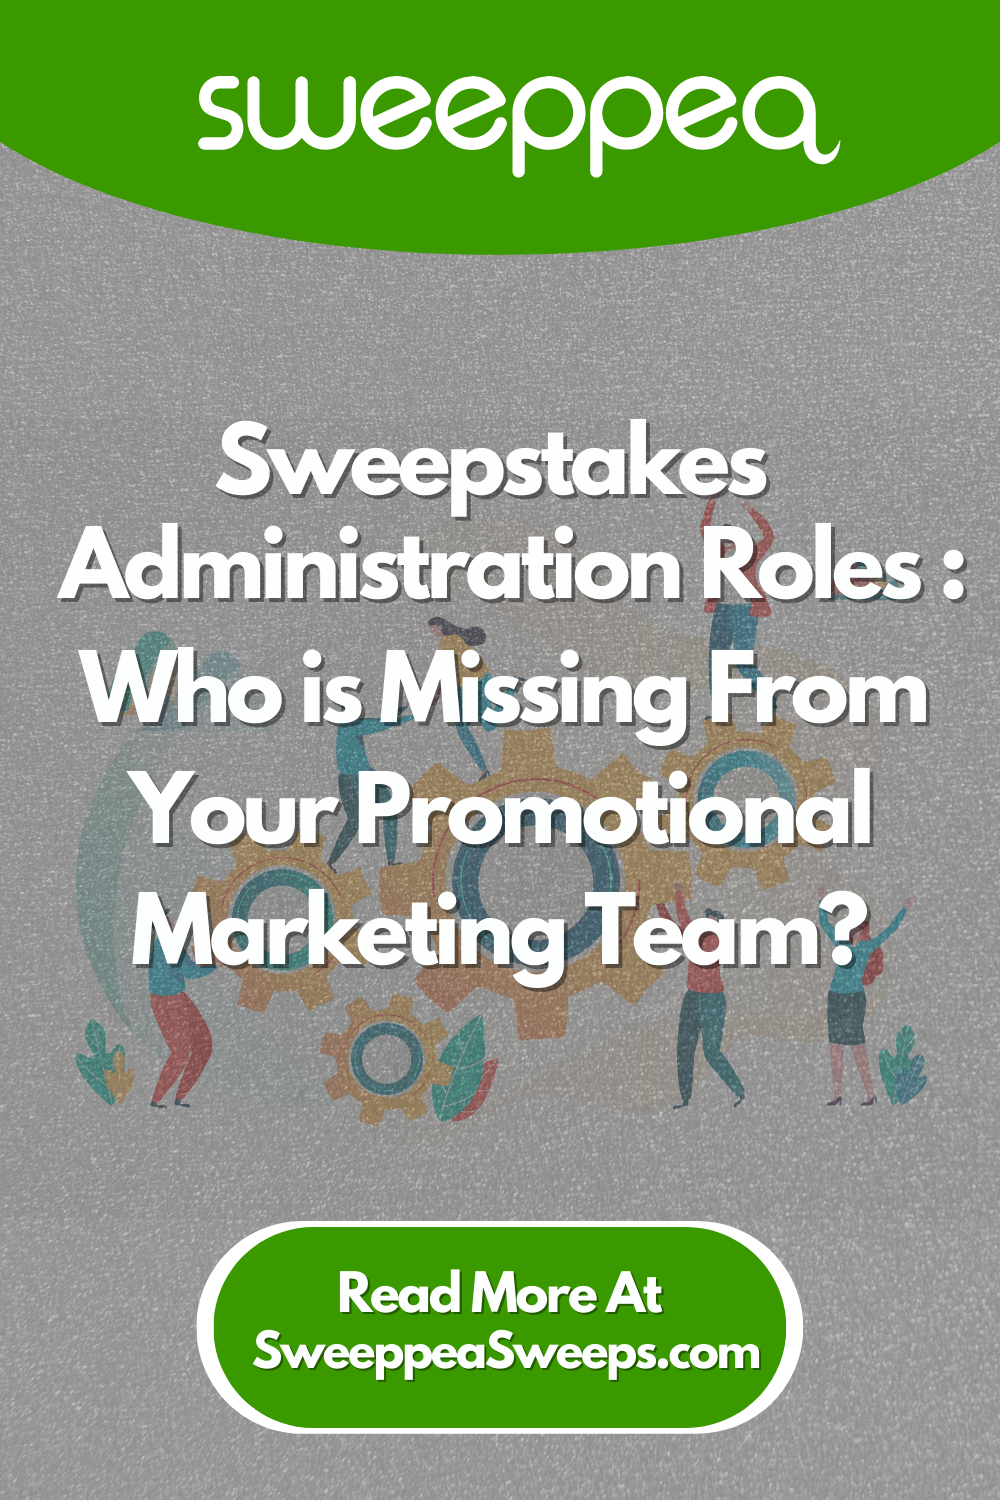 sweepstakes administration roles: who is missing from your promotional marketing team?